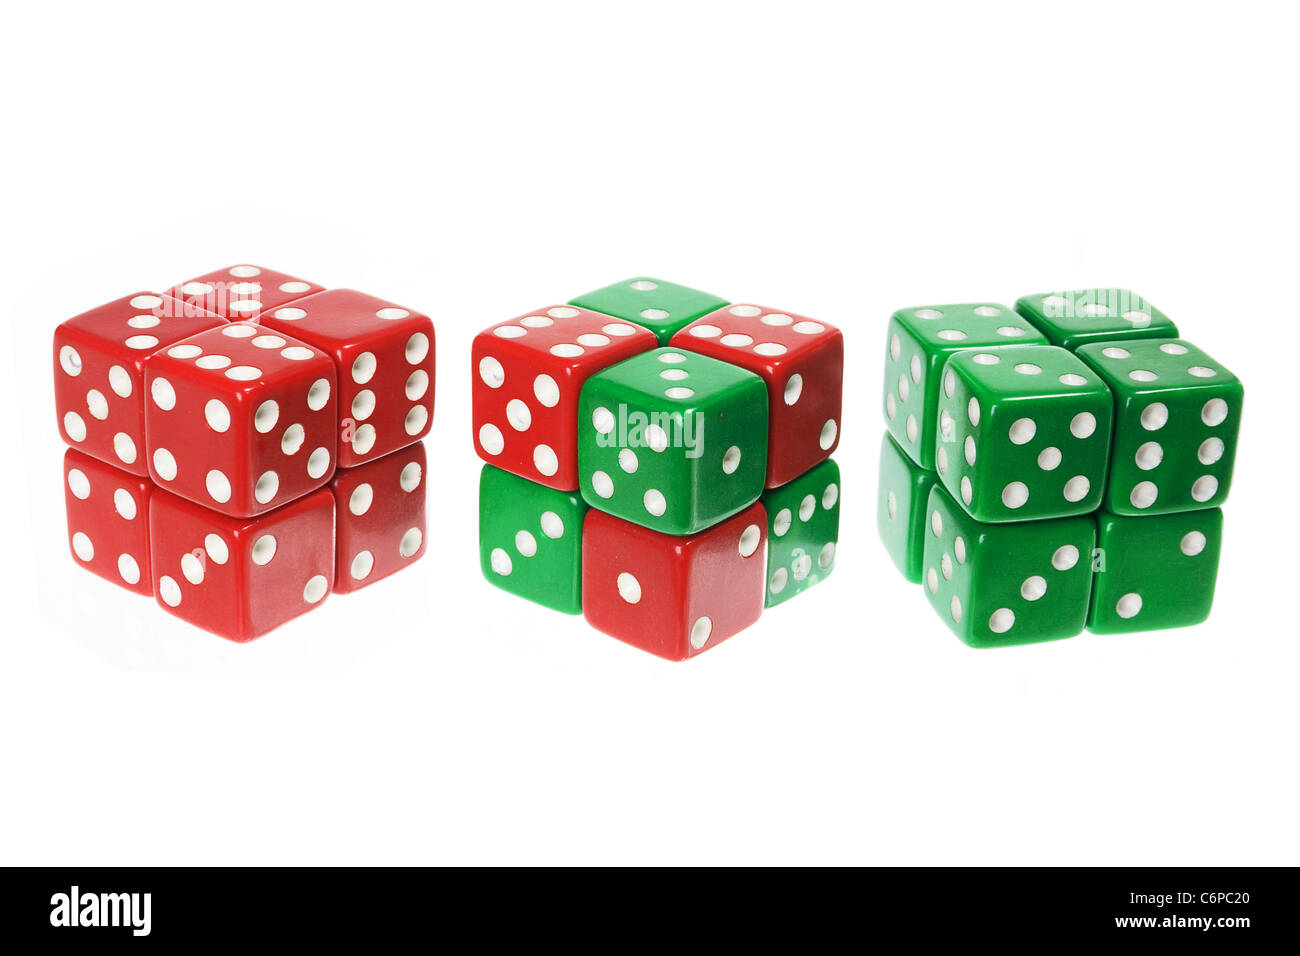 Green and Red Dice Stock Photo